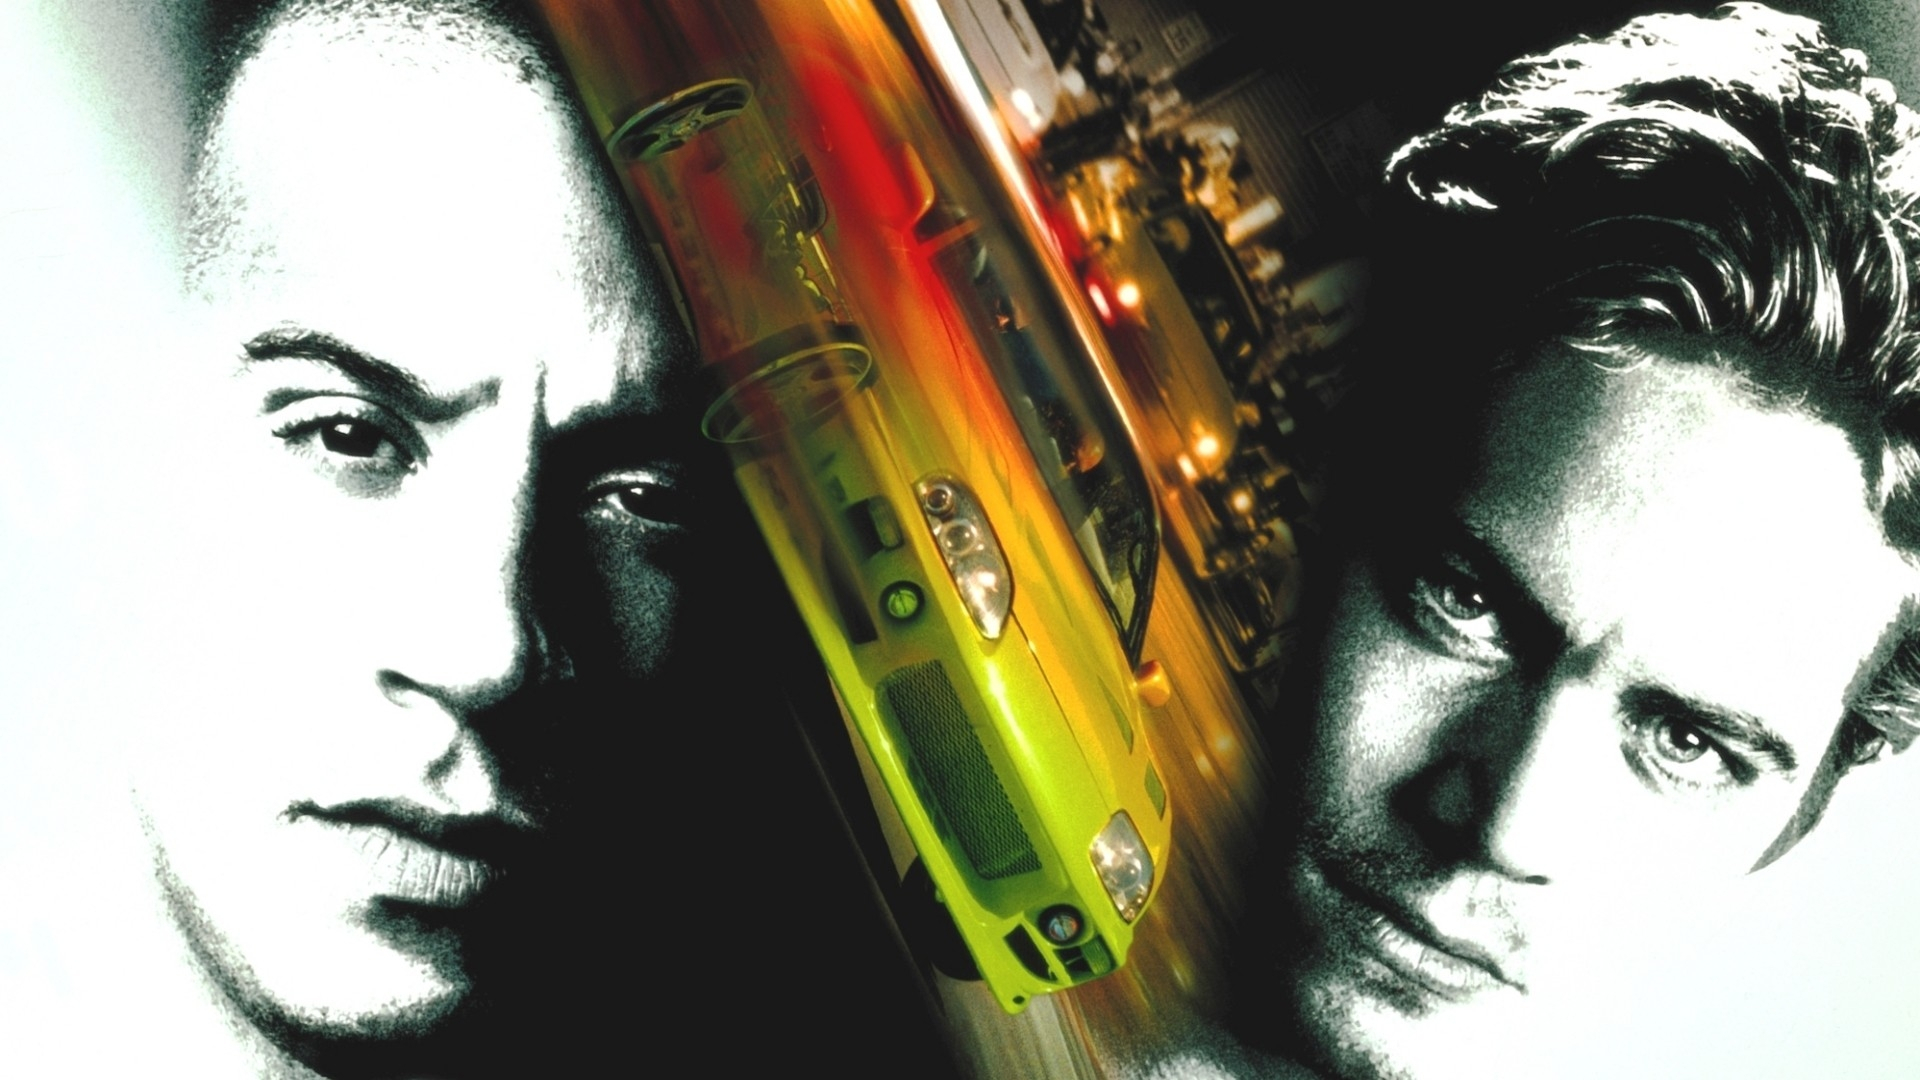 1920x1080 Wallpaper : the fast and the furious, Vin Diesel, Paul Walker wallup 661045 HD Wallpapers